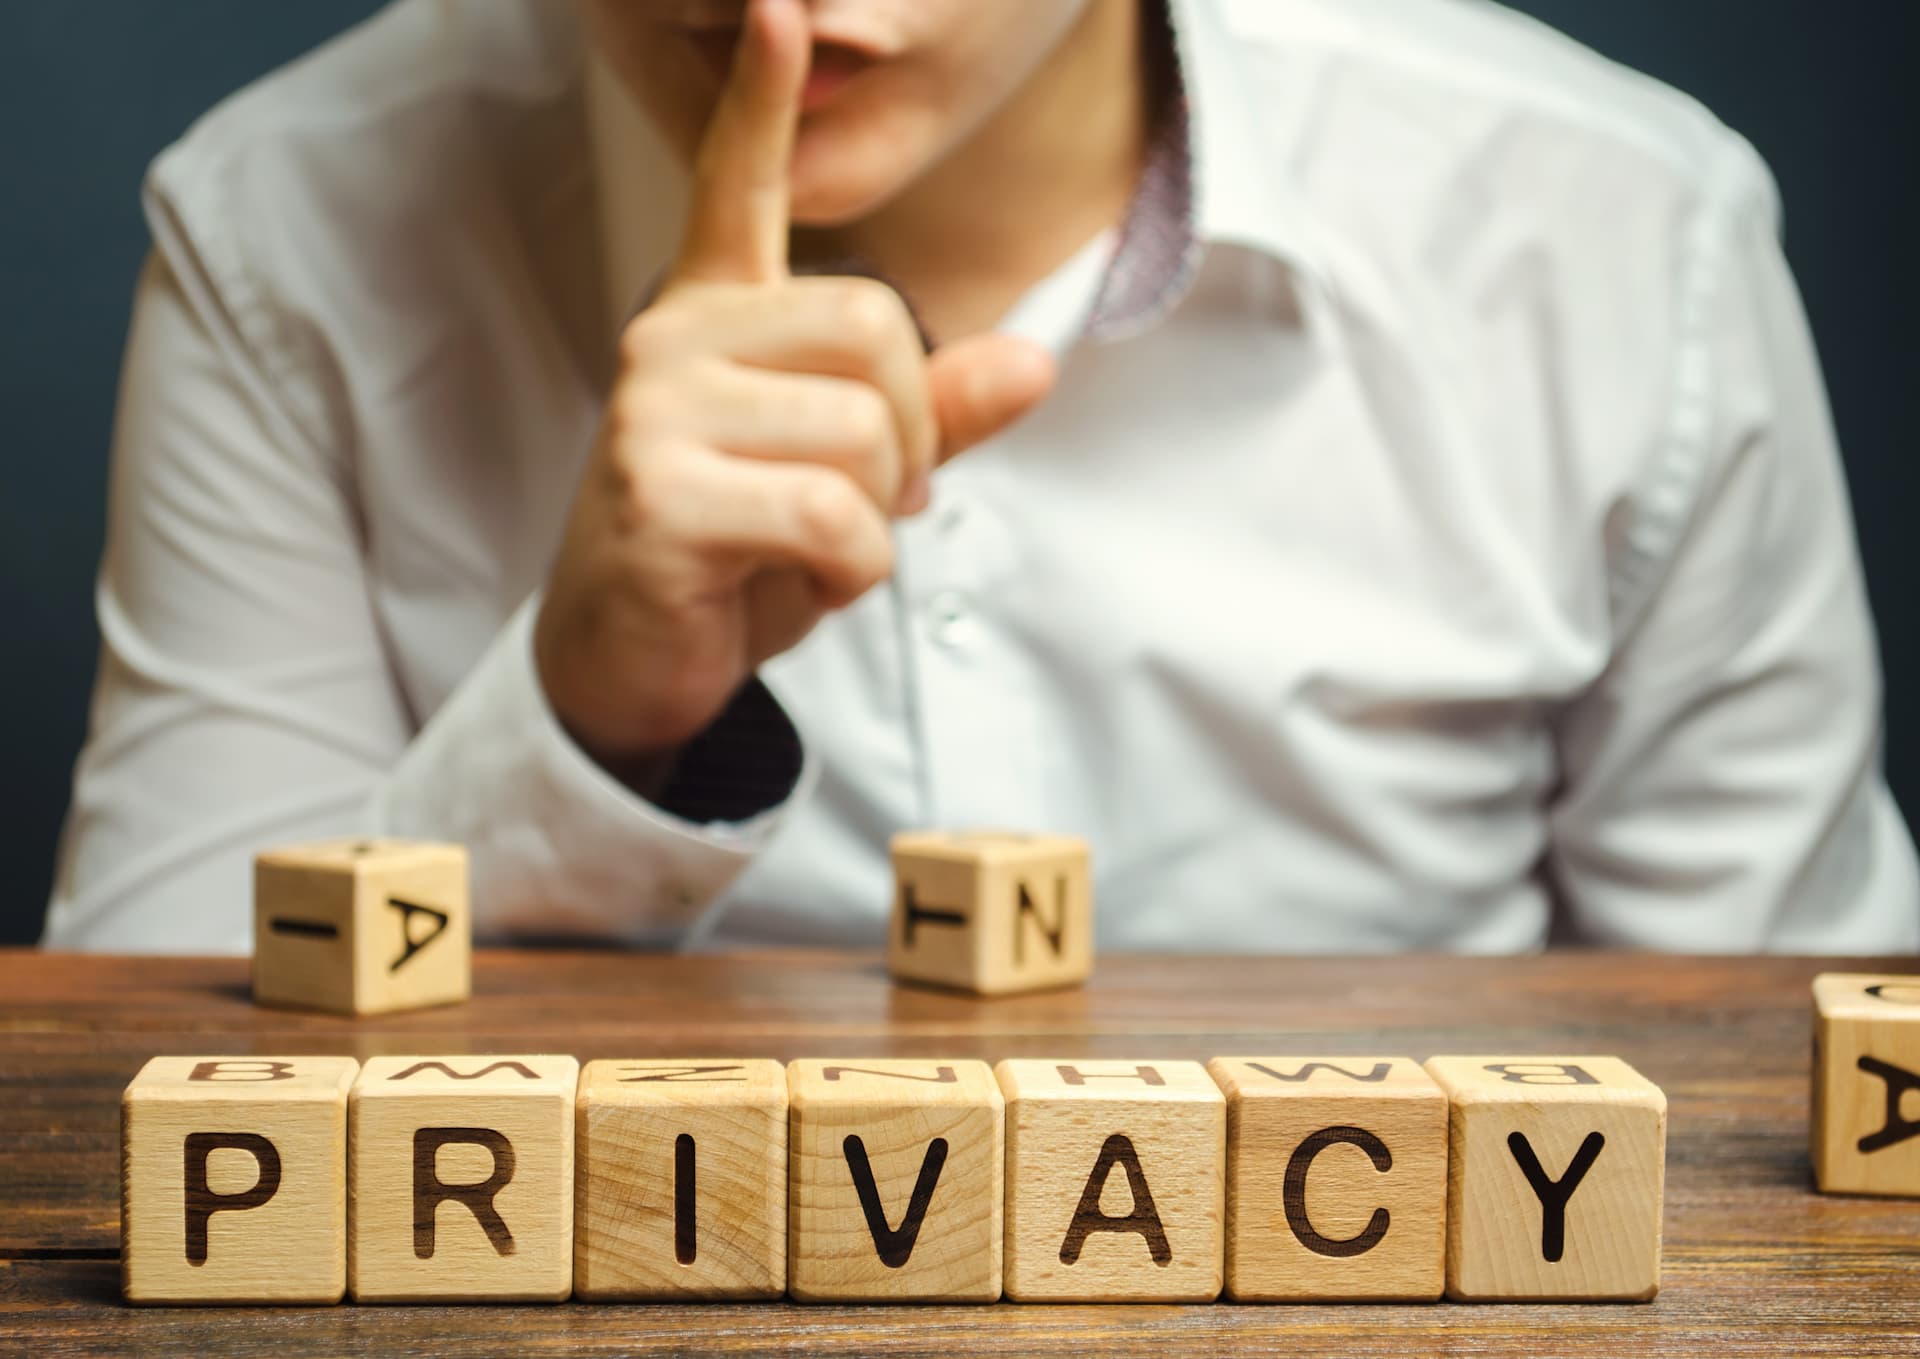 Upcoming domestic privacy laws you should know about